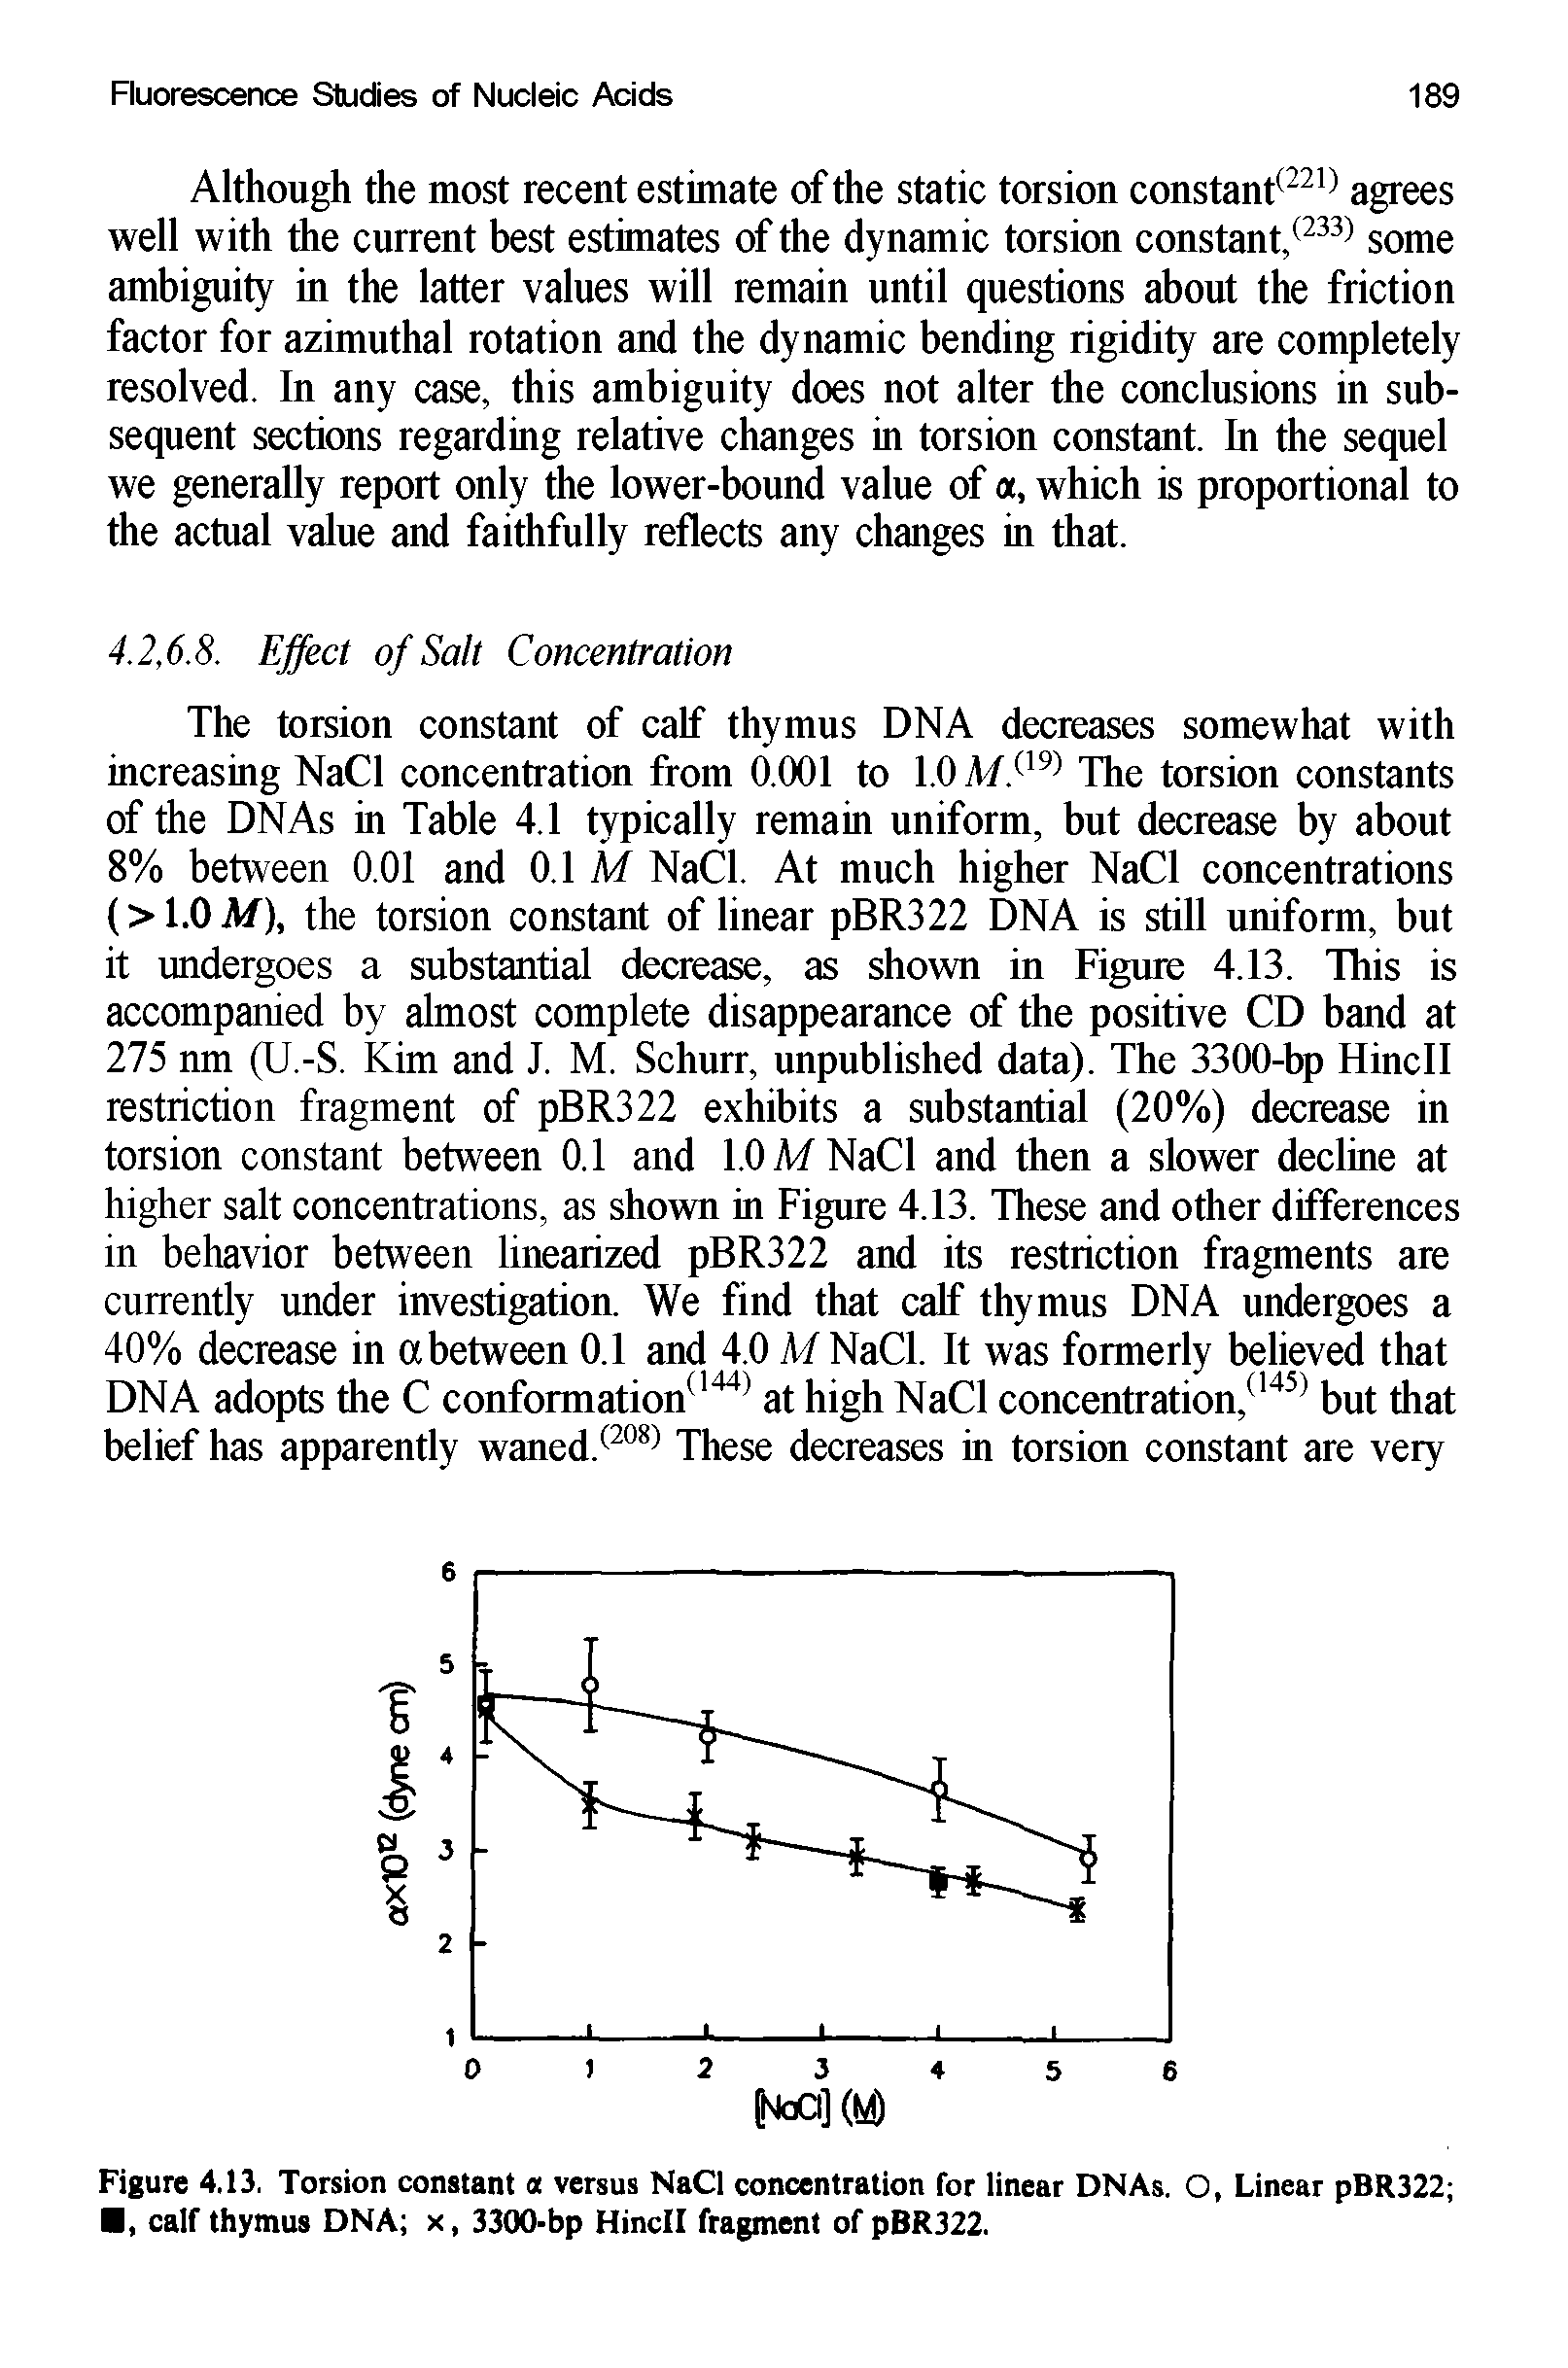 Figure 4.13, Torsion constant a. versus NaCl concentration for linear DNAs. O, Linear pBR322 , calf thymus DNA x, 3300-bp Hindi fragment of pBR322.